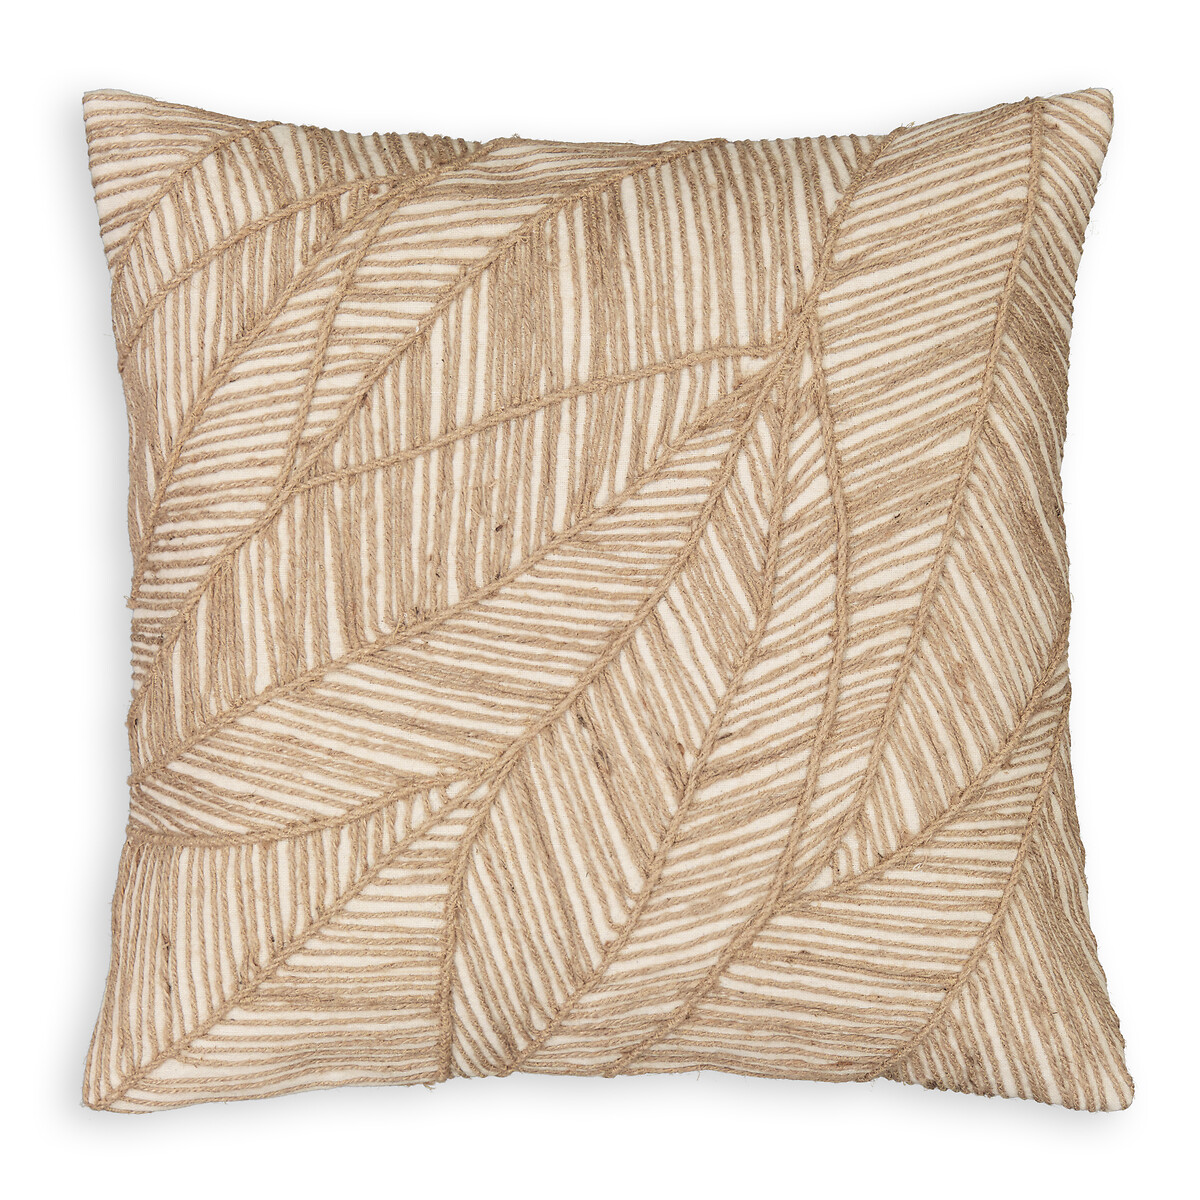 Padang 40 x 40cm Jute Embroidered Cotton/Linen Cushion Cover